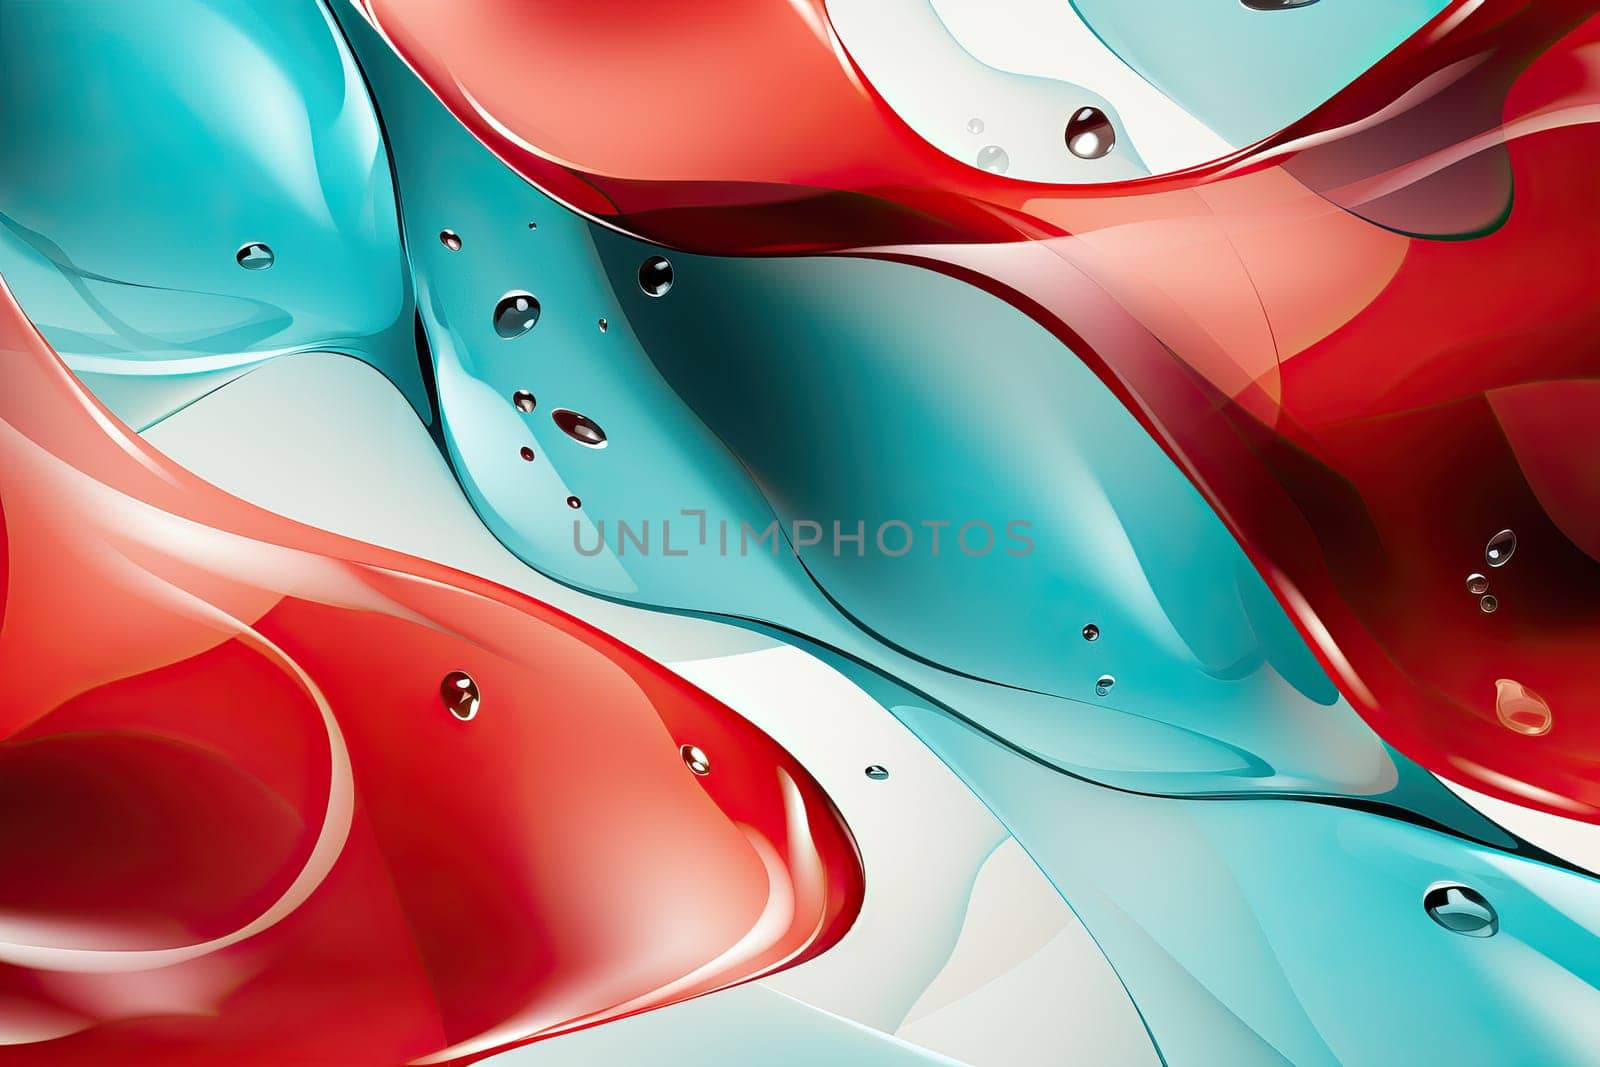 Abstract black background with red drops of various rounded shapes, screensaver and wallpaper with red drops and blue background.